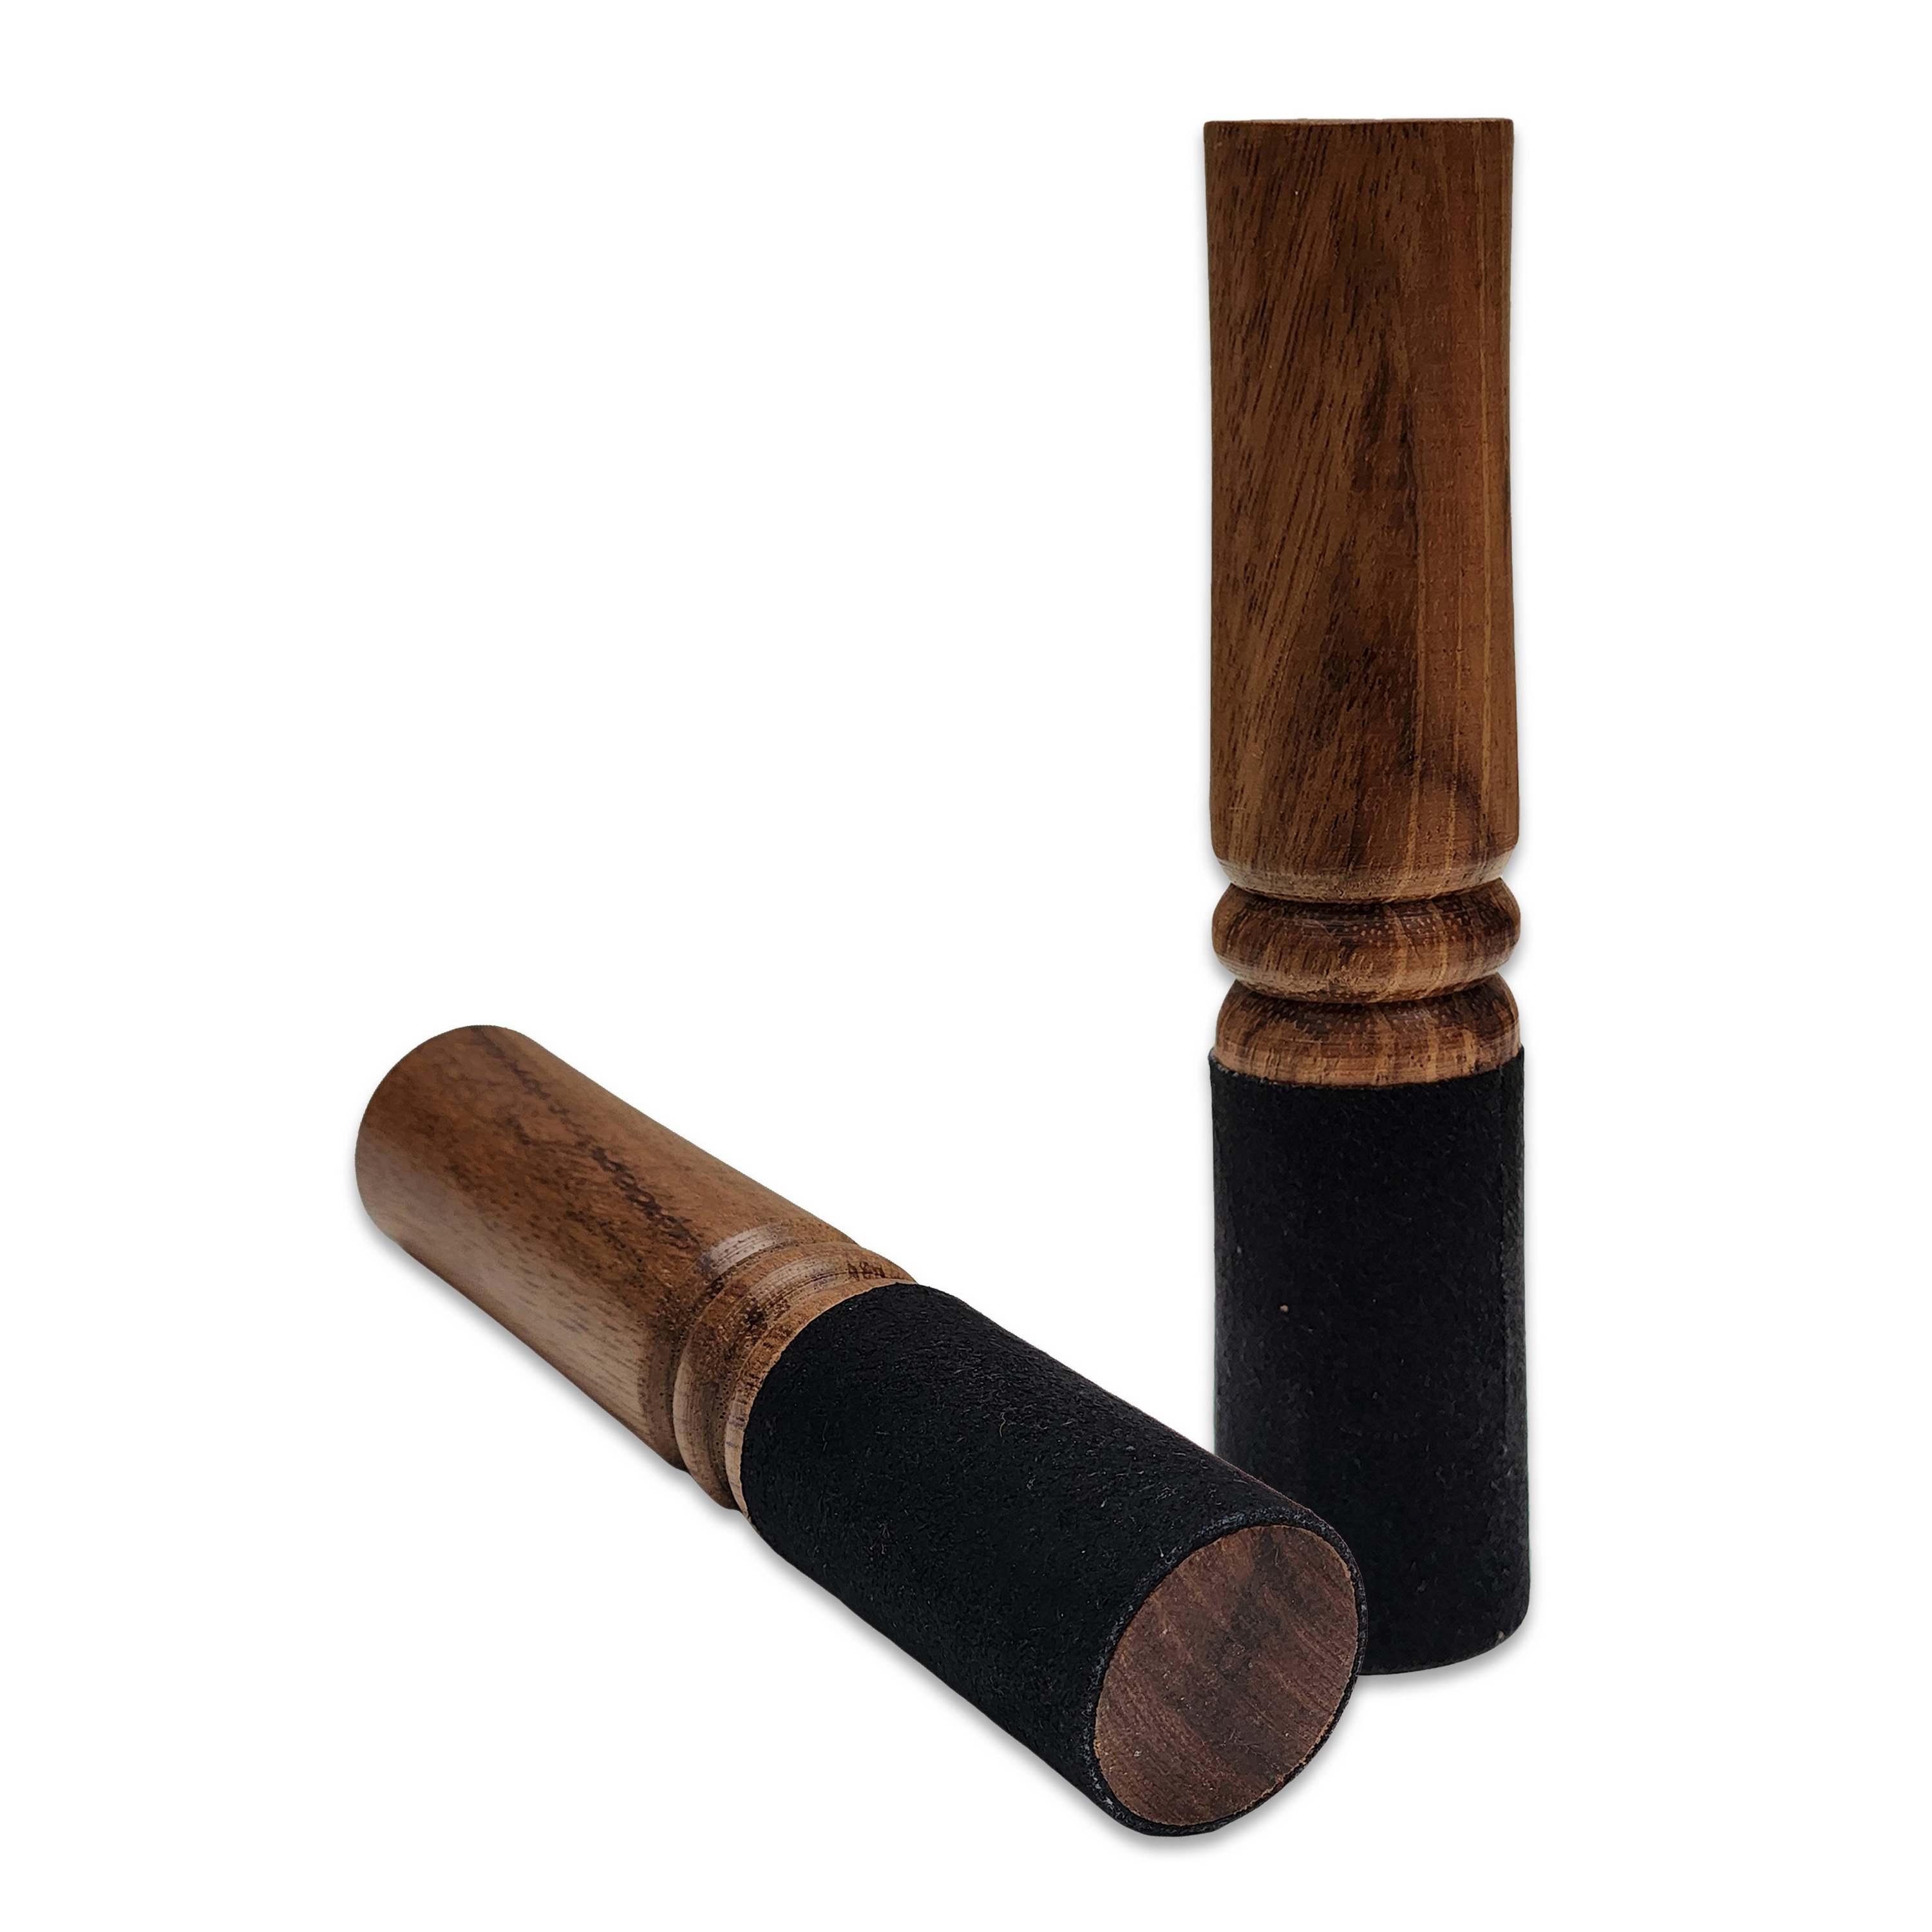 Singing Bowl Accessories, Wooden And Leather, Stroking And Playing Mallet, Extra Small